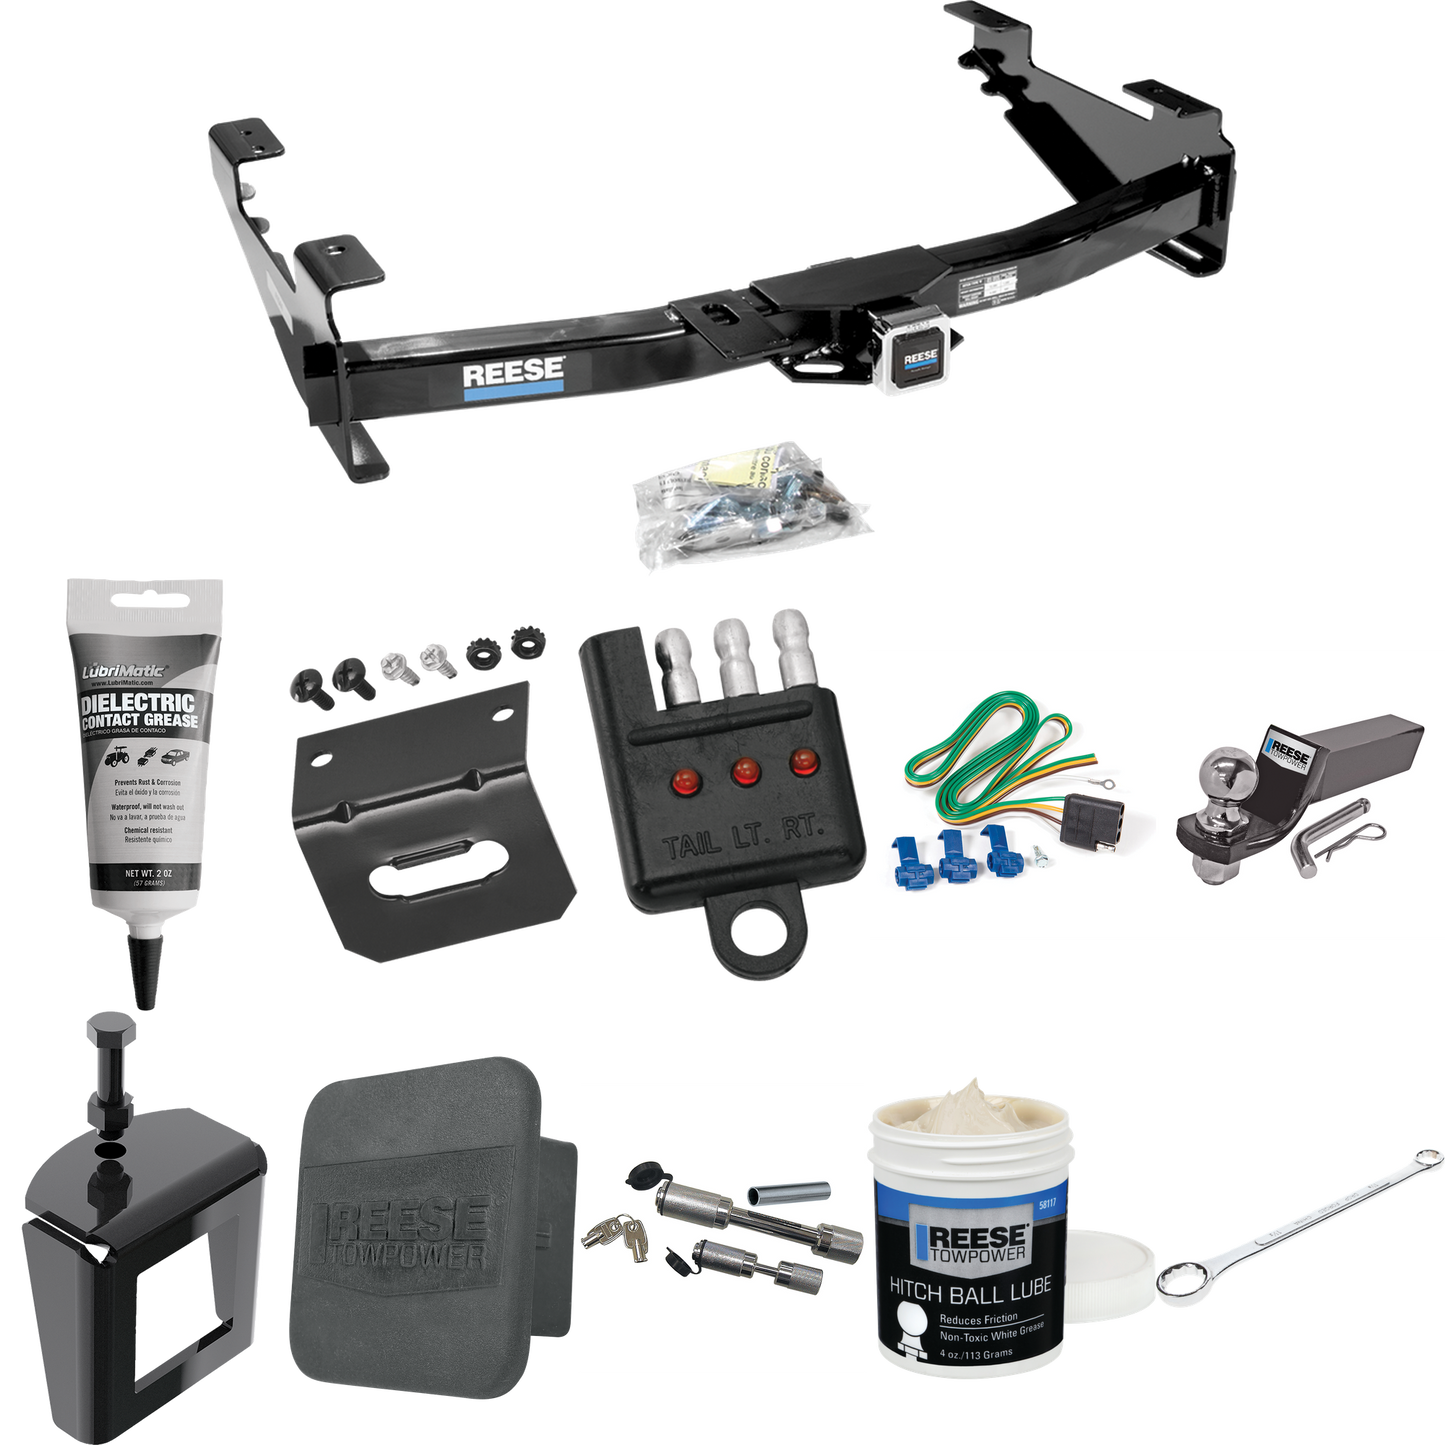 Fits 2001-2002 Chevrolet Silverado 2500 HD Trailer Hitch Tow PKG w/ 4-Flat Wiring + Starter Kit Ball Mount w/ 2" Drop & 2" Ball + Wiring Bracket + Hitch Cover + Dual Hitch & Coupler Locks + Wiring Tester + Ball Lube + Electric Grease + Ball Wrench +